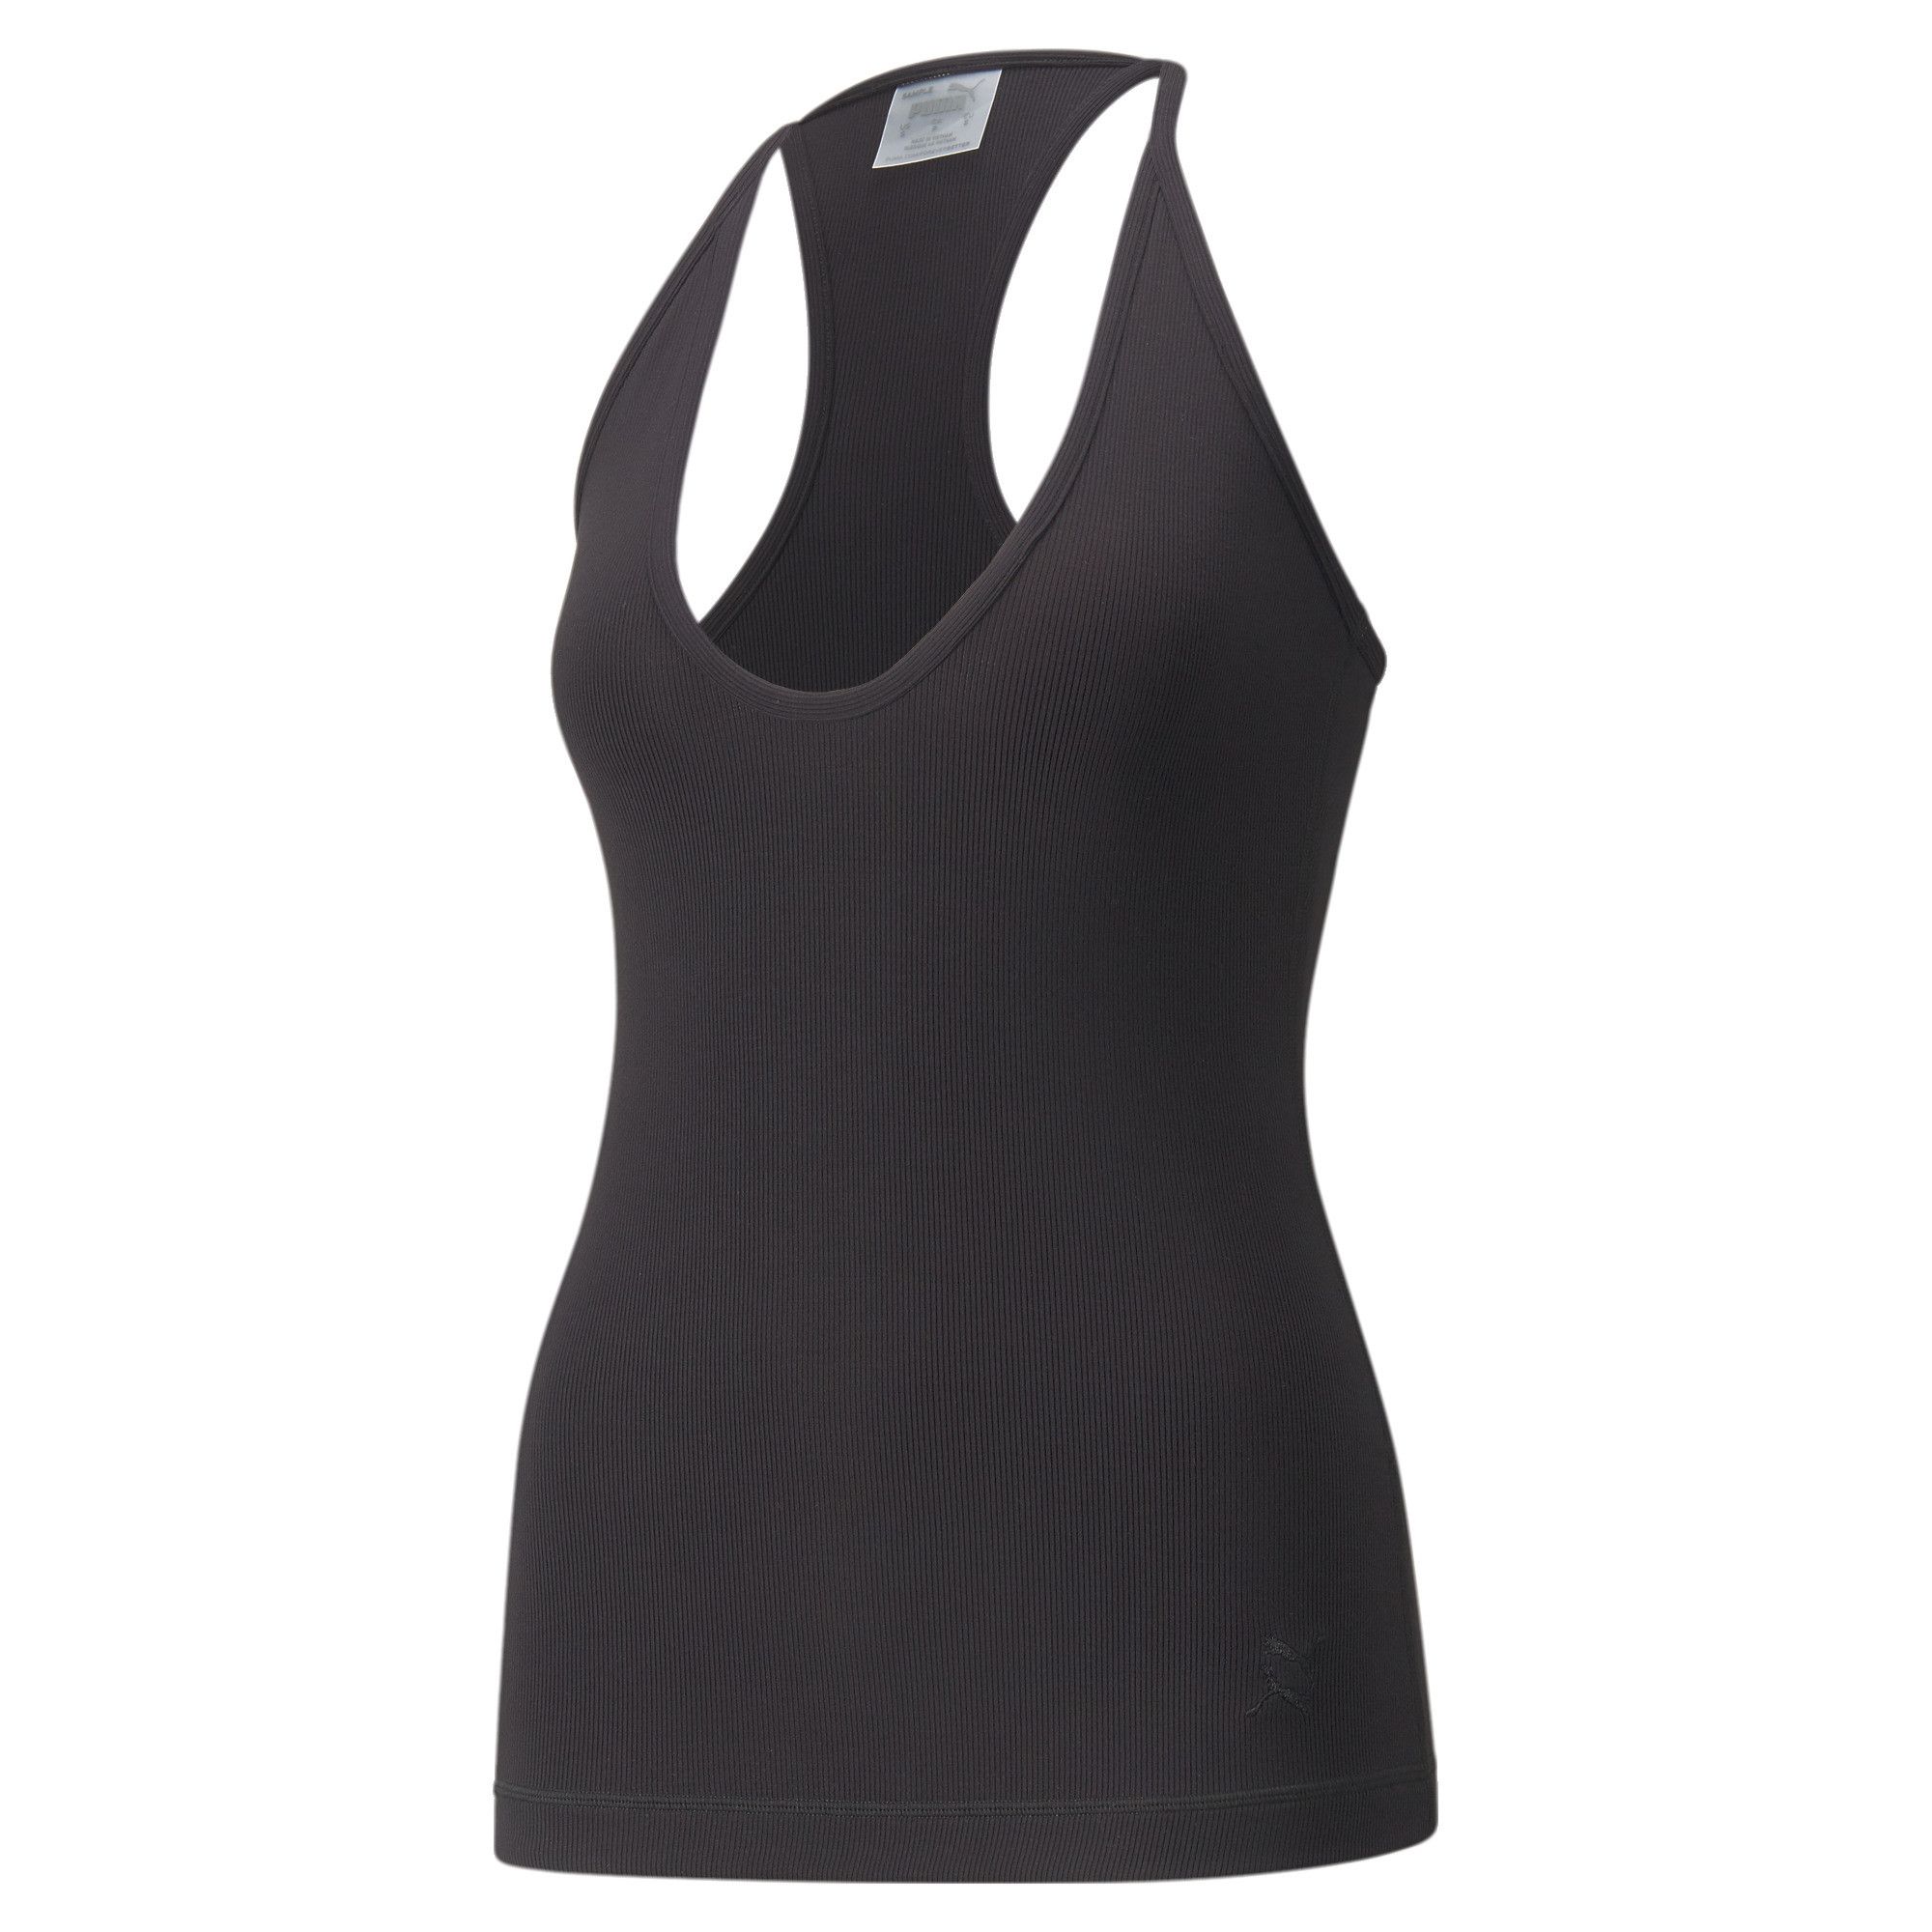  The perfect layering piece for workouts of every kind, from the gym to the track to the yoga studio. The stylish racerback design and deep V-neck maximise your freedom of movement during training, and the soft ribbed material makes for a snug, comfy fit. This piece from our elegant Exhale collection is made with recycled materials as a step towards better sustainability. FEATURES & BENEFITS Recycled Content: Made with at least 20% recycled material as a step toward a better future  DETAILS V-neckSleeveless cutEmbroidered shiny mirrored PUMA Cat Logo at bottom leftModal, recycled polyester and elastane